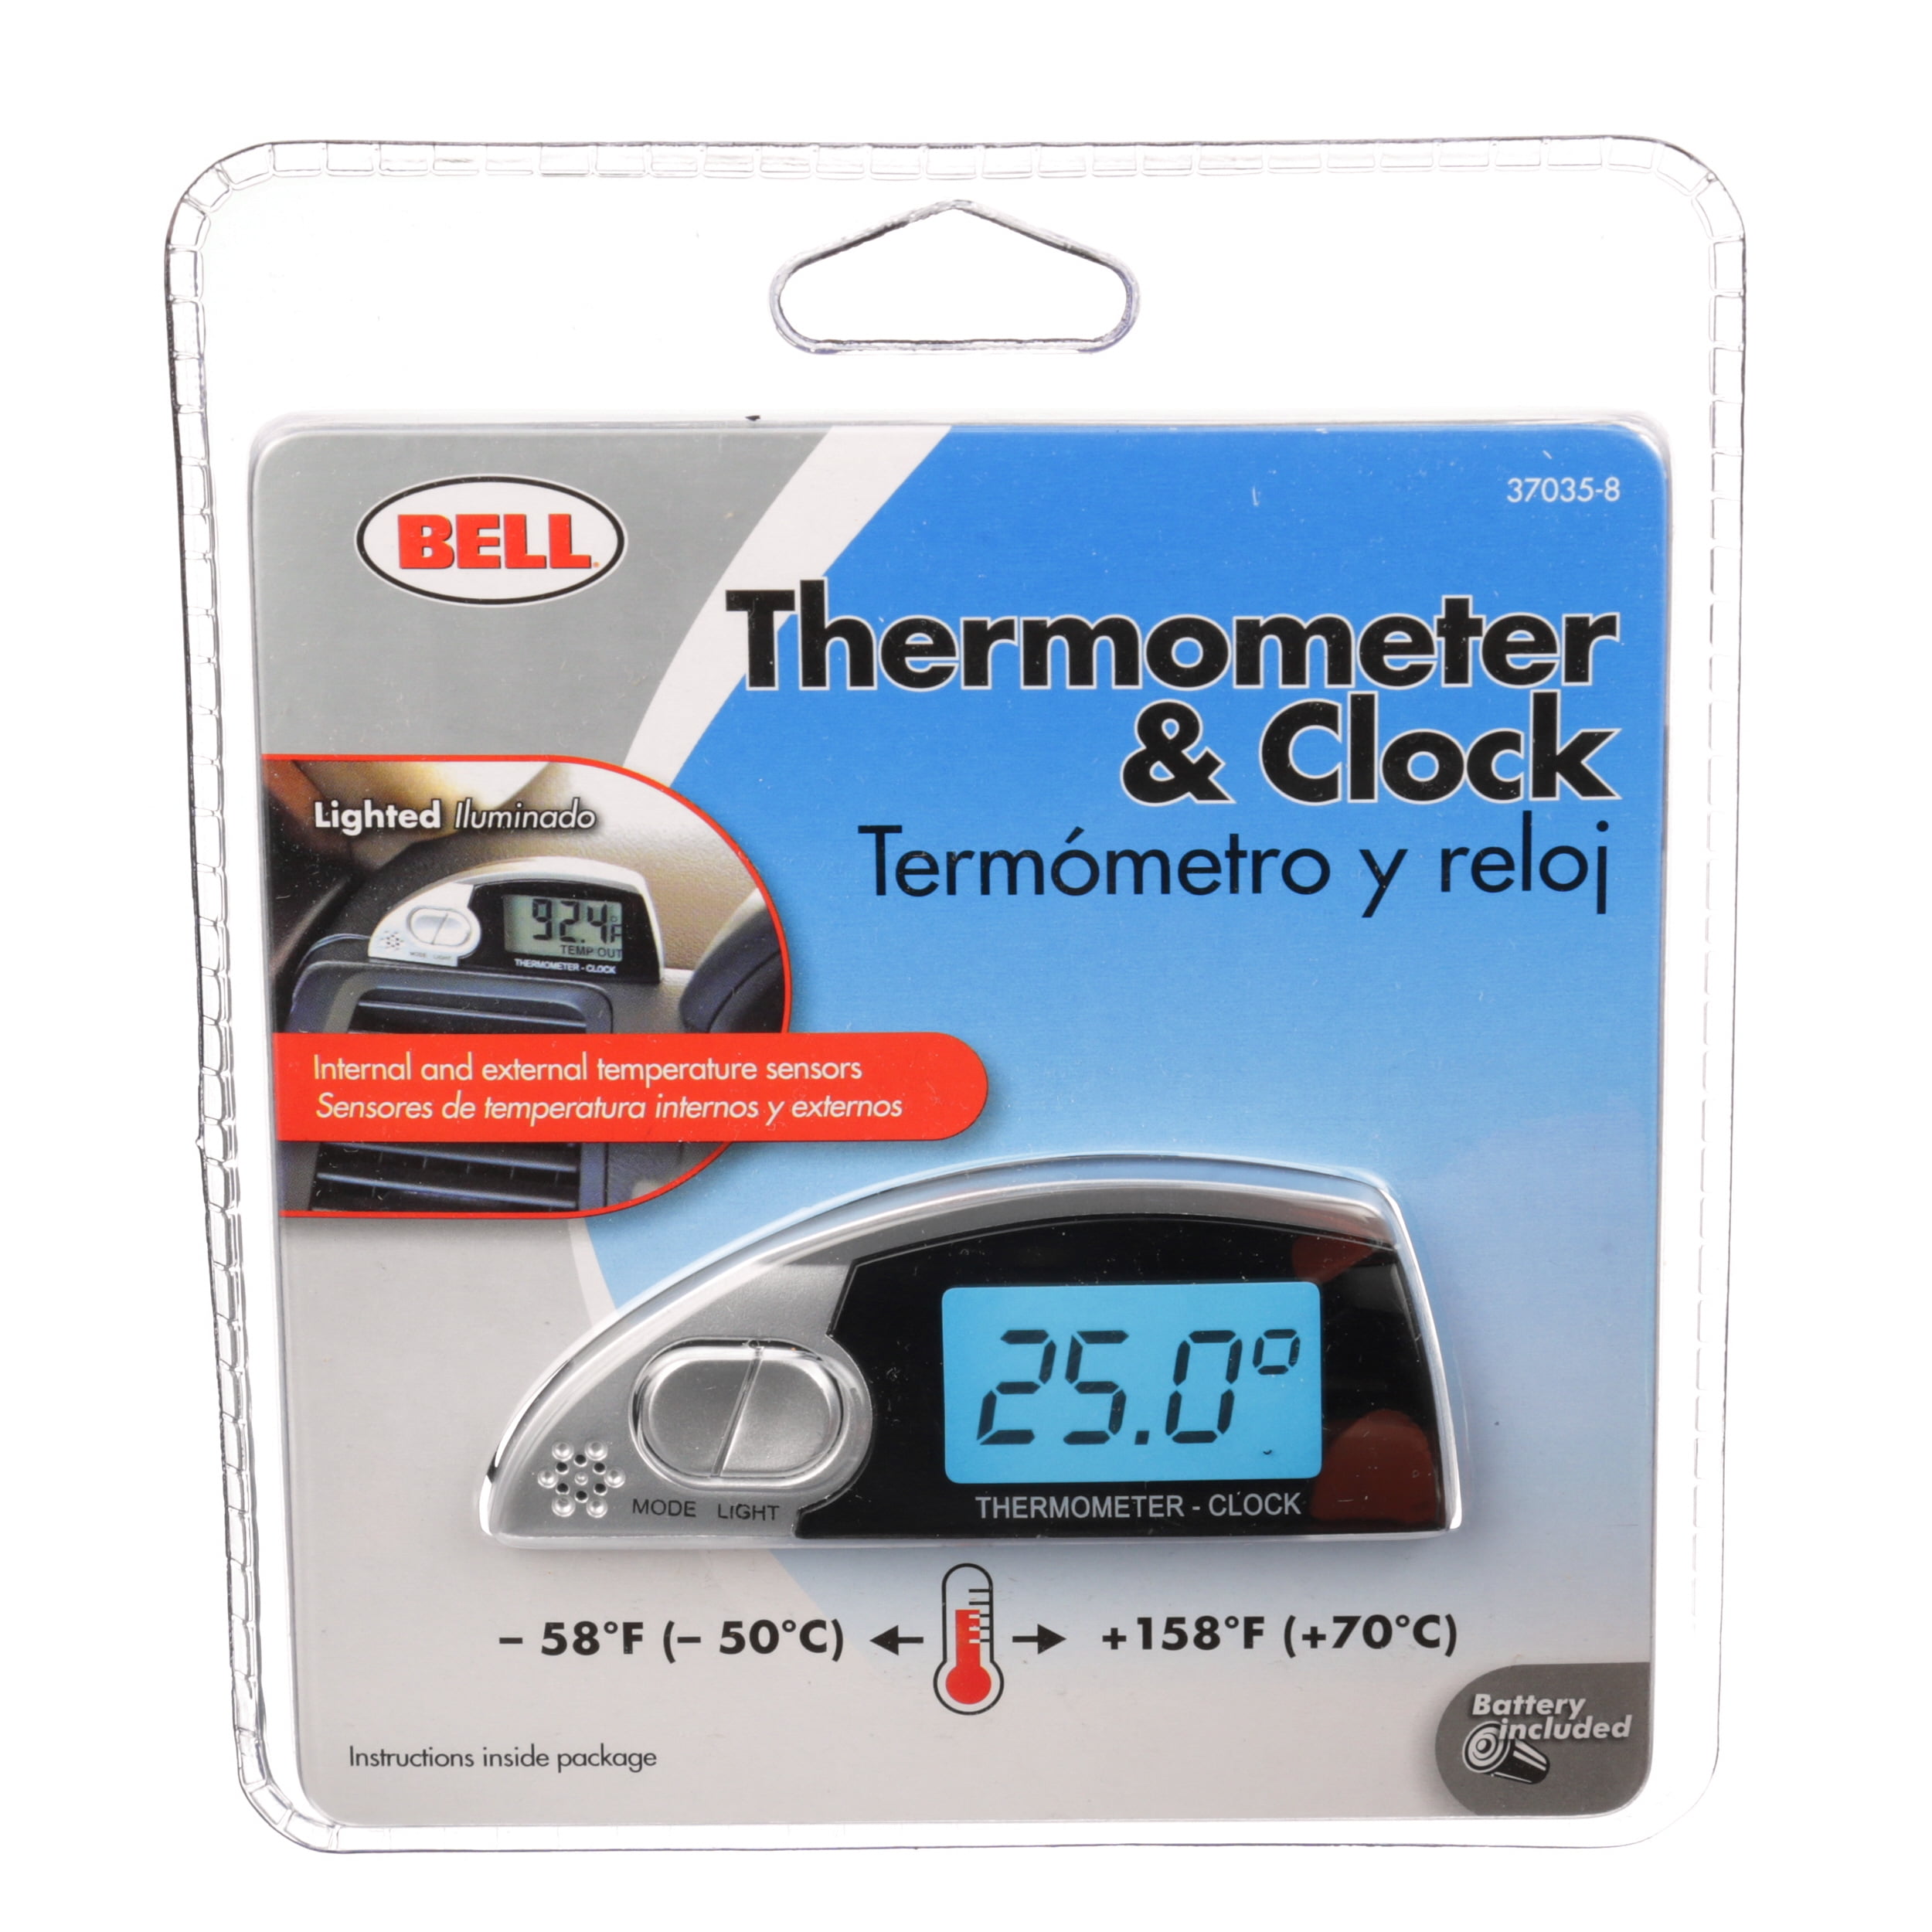 HR Auto Comfort Richter 4696 Universal Car Compact Classic Analogue Square  Thermometer